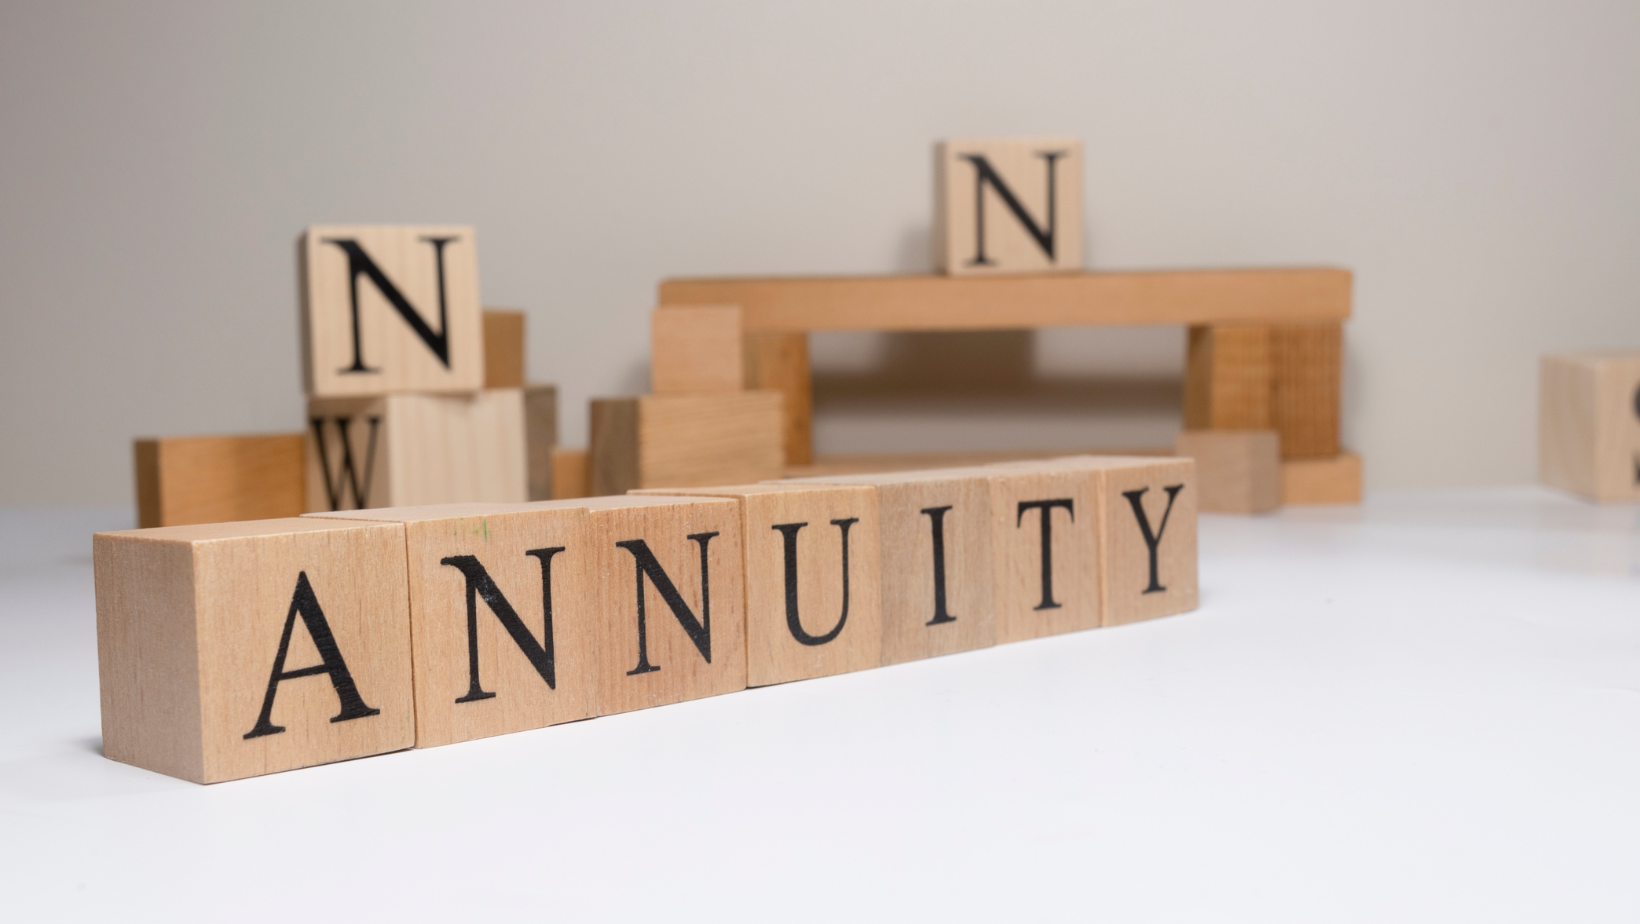 Factors to consider when selecting an Annuity